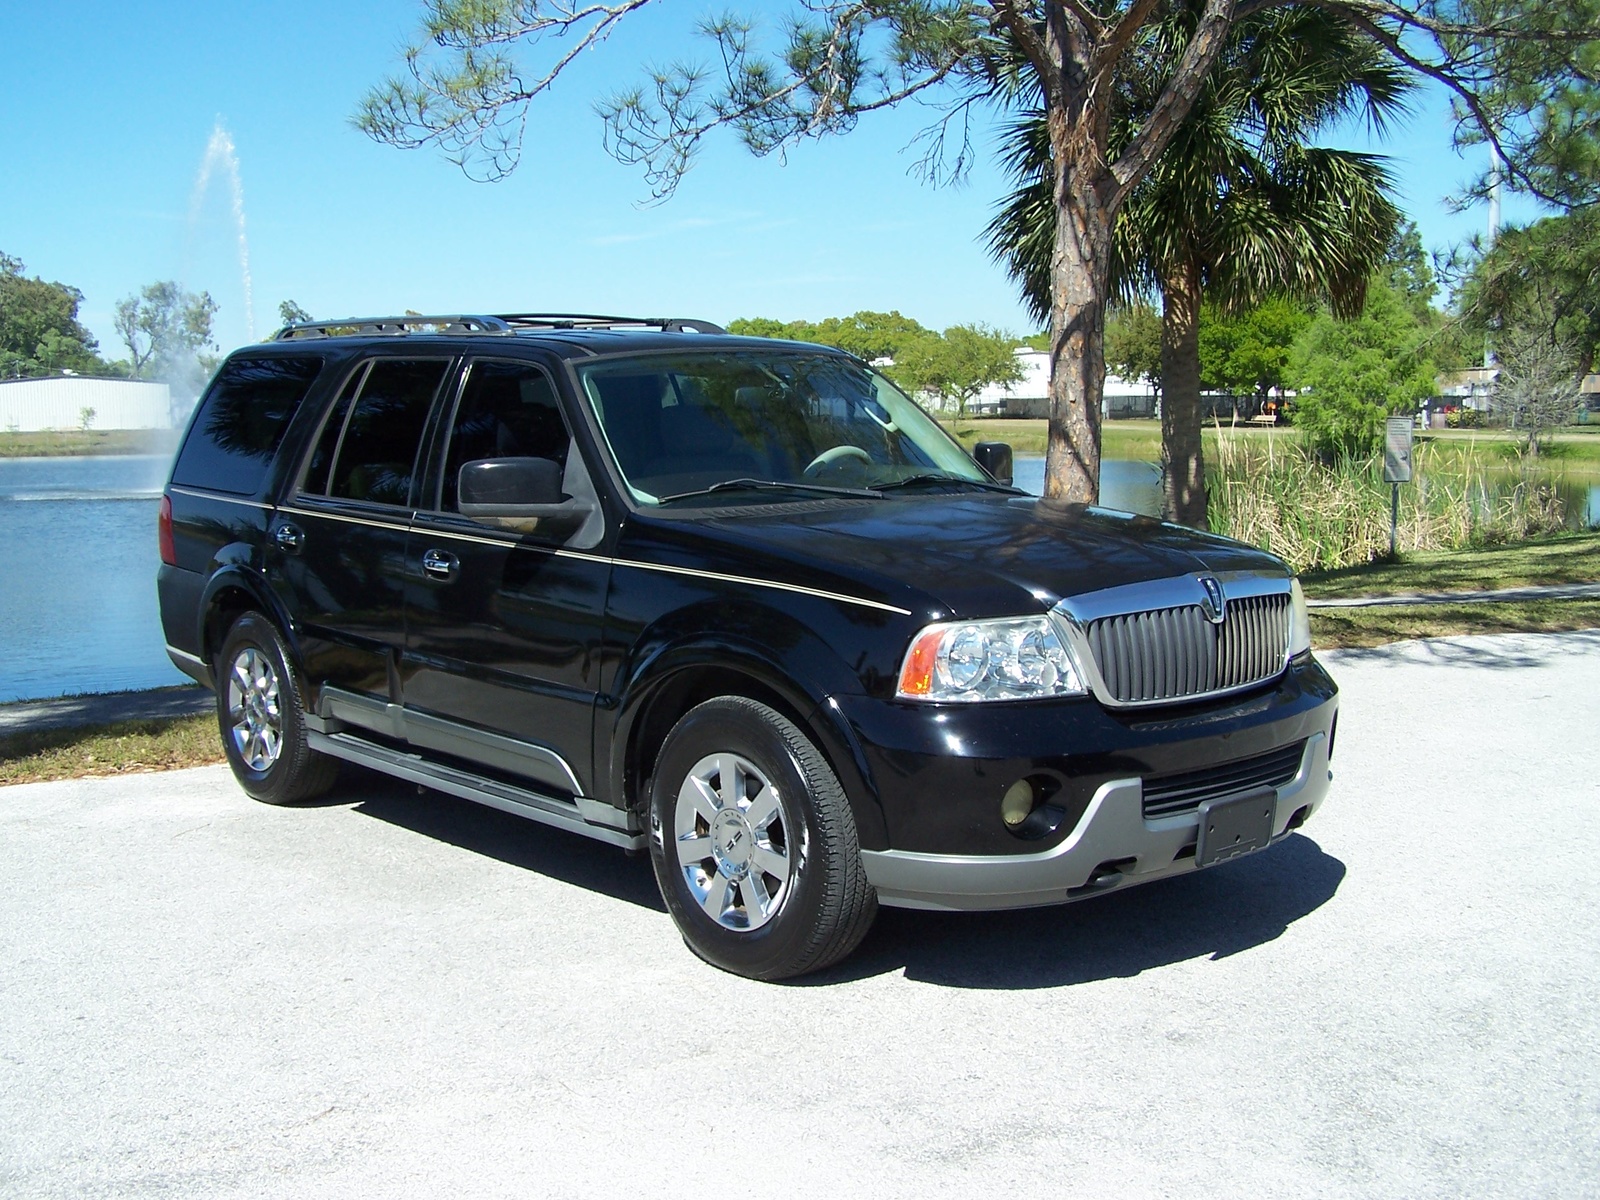 2003 Lincoln Navigator Test Drive Review - CarGurus